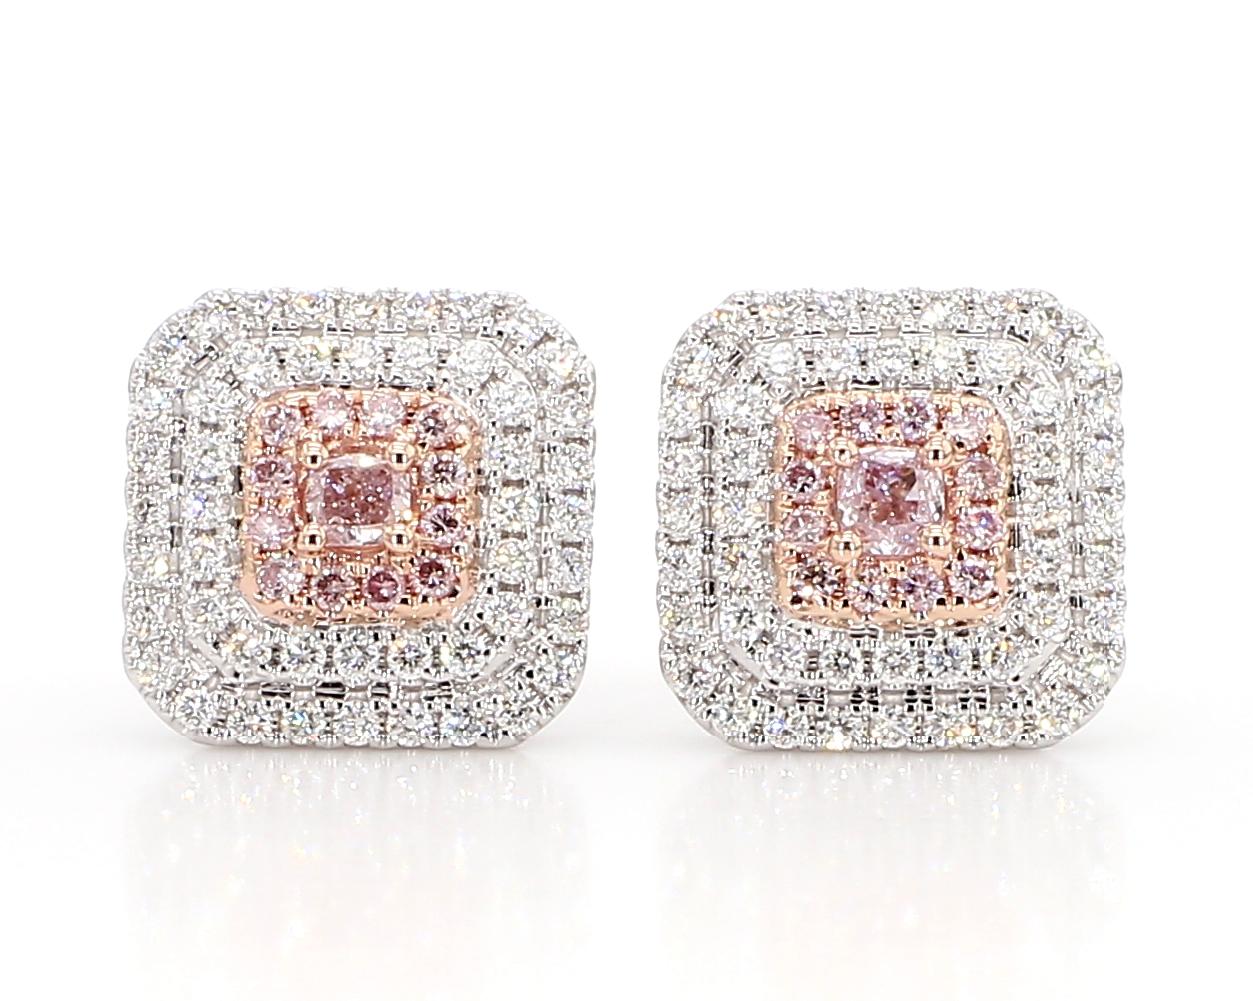 RareGemWorld's classic GIA certified diamond earrings. Mounted in a beautiful 18K Rose and White Gold setting with natural cushion cut pink diamonds. The pink diamonds are surrounded by round natural pink diamond melee and round natural white